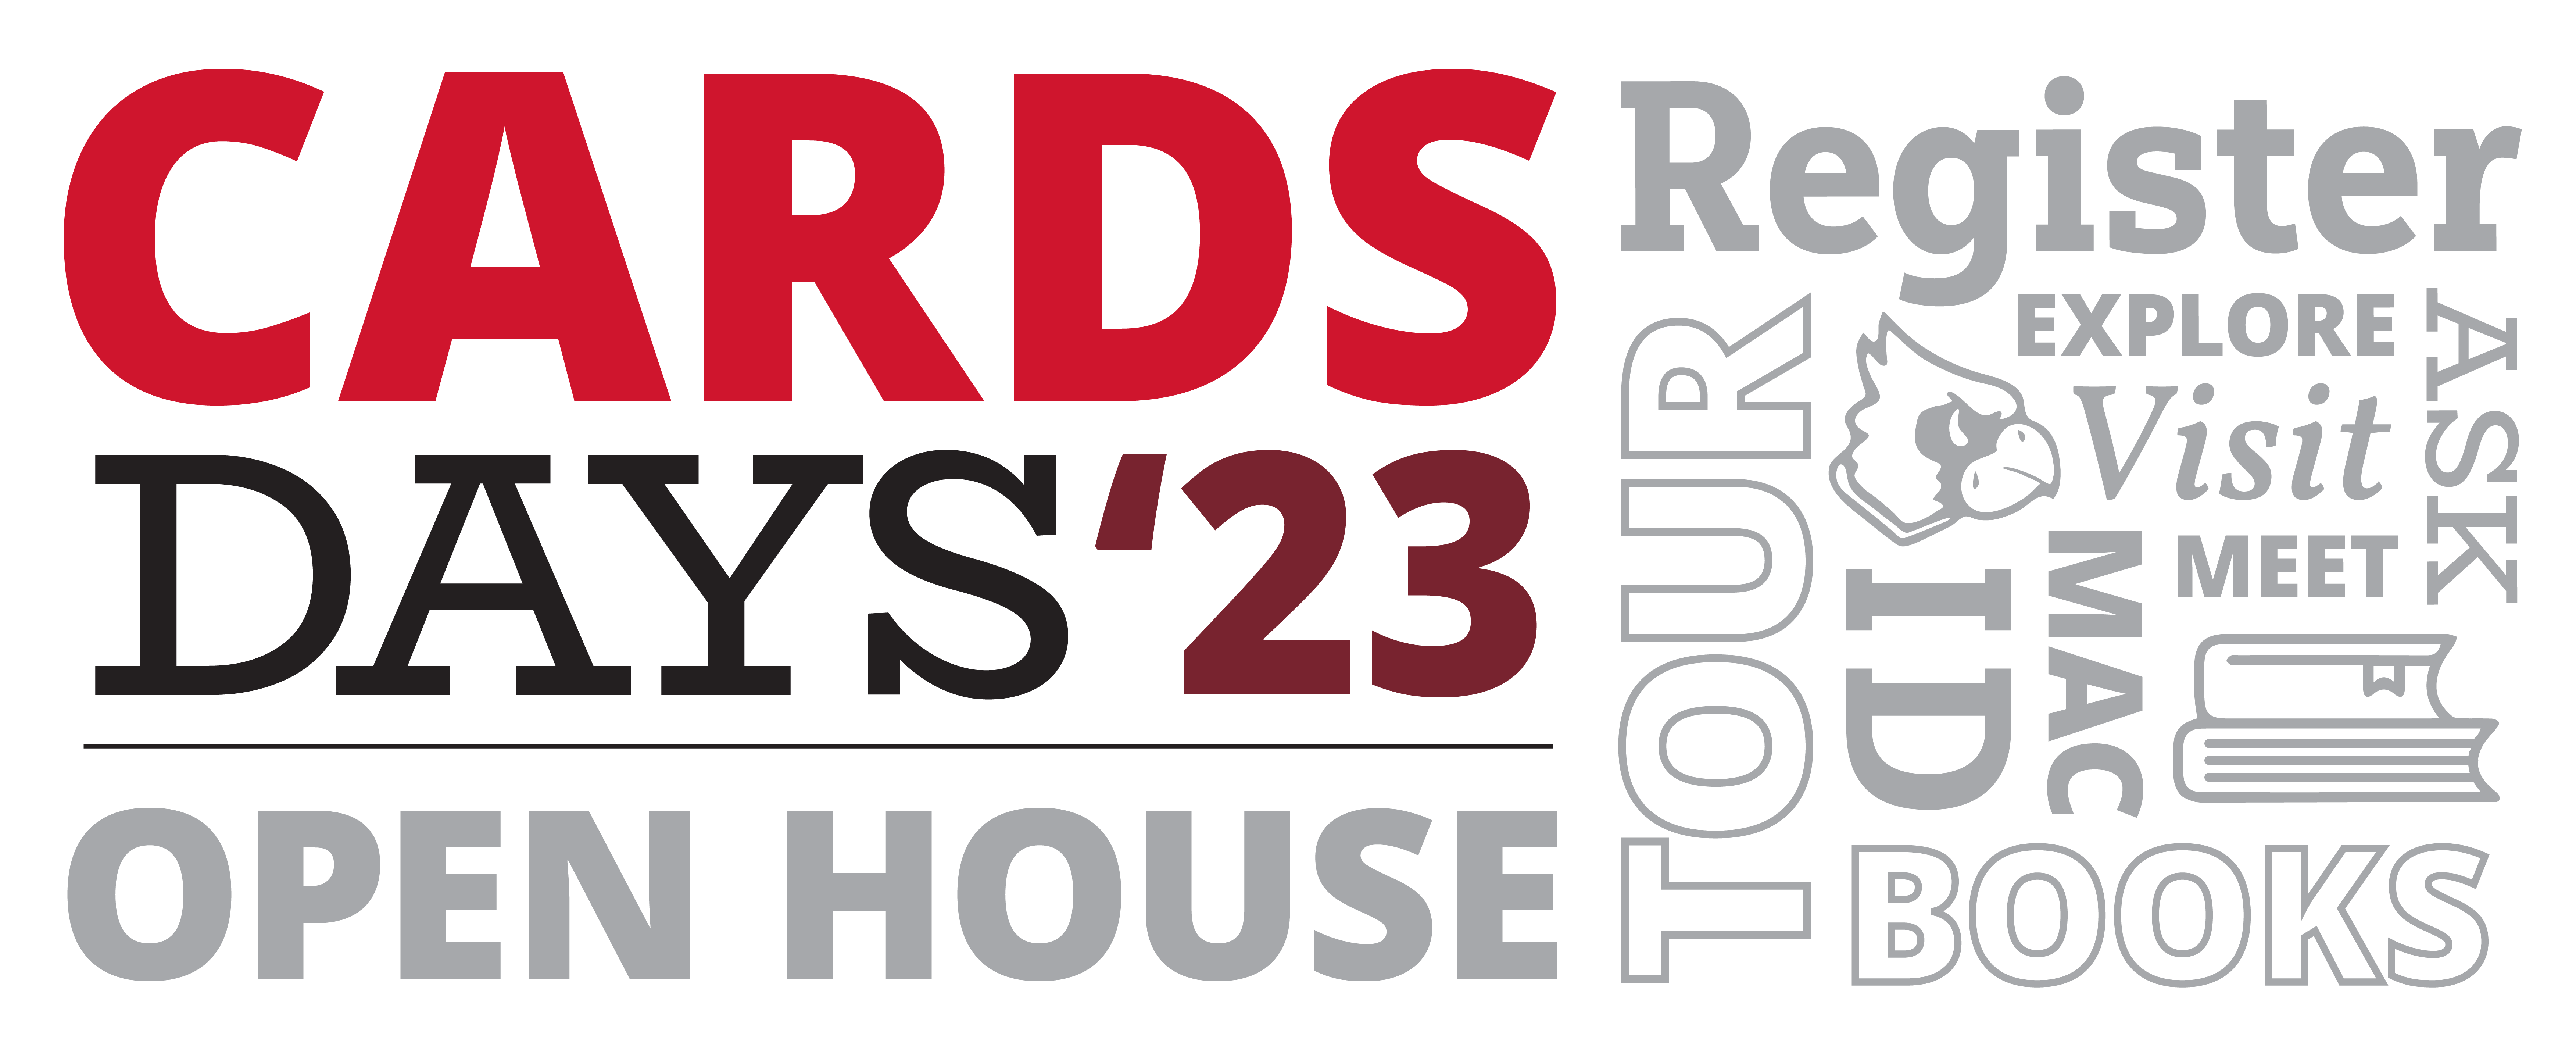 CARDS DAYS '23 graphic with words like Open House, Register, Tour, ID, Books, Visit, Ask, Meet, Visit, Explore